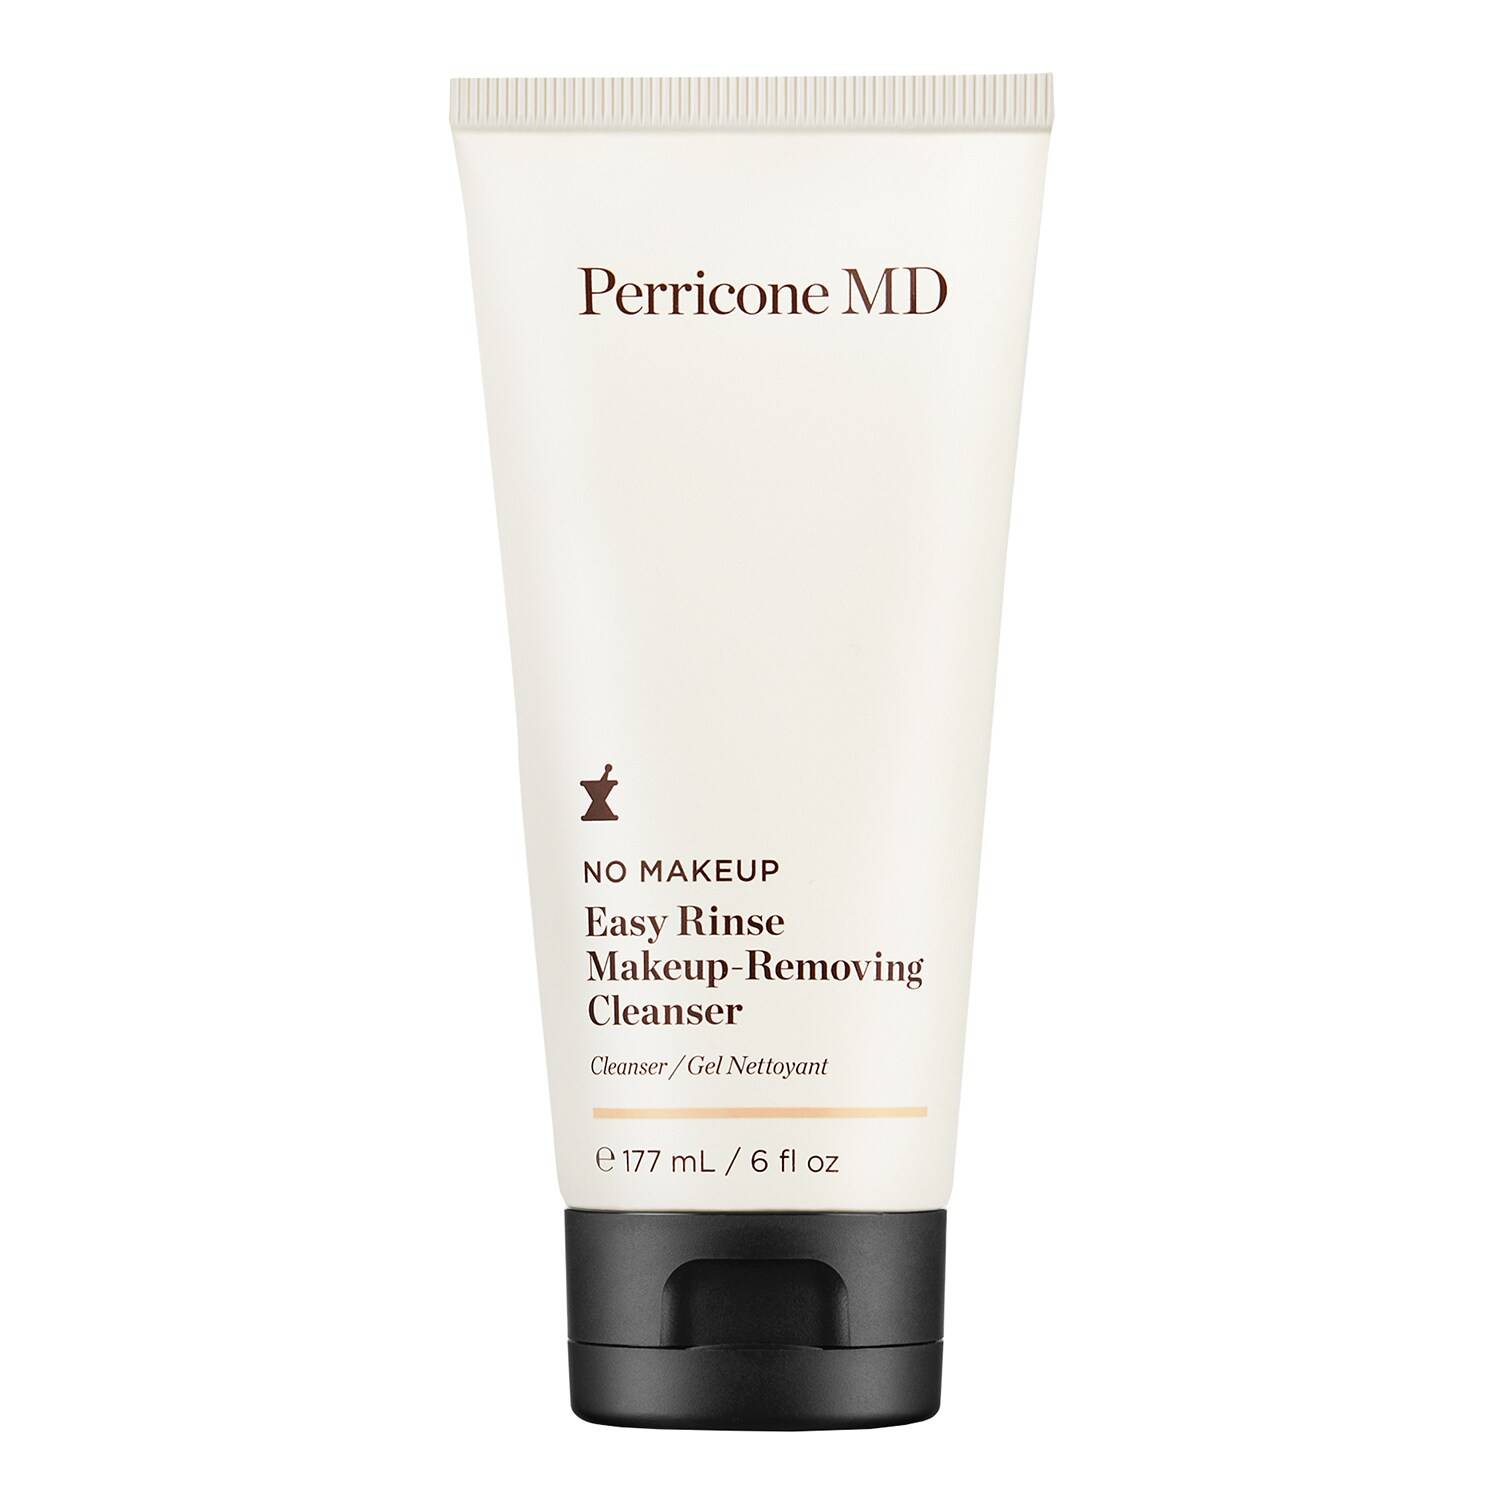 Perricone Md No Makeup Easy Rinse Makeup-Removing Cleanser 59Ml